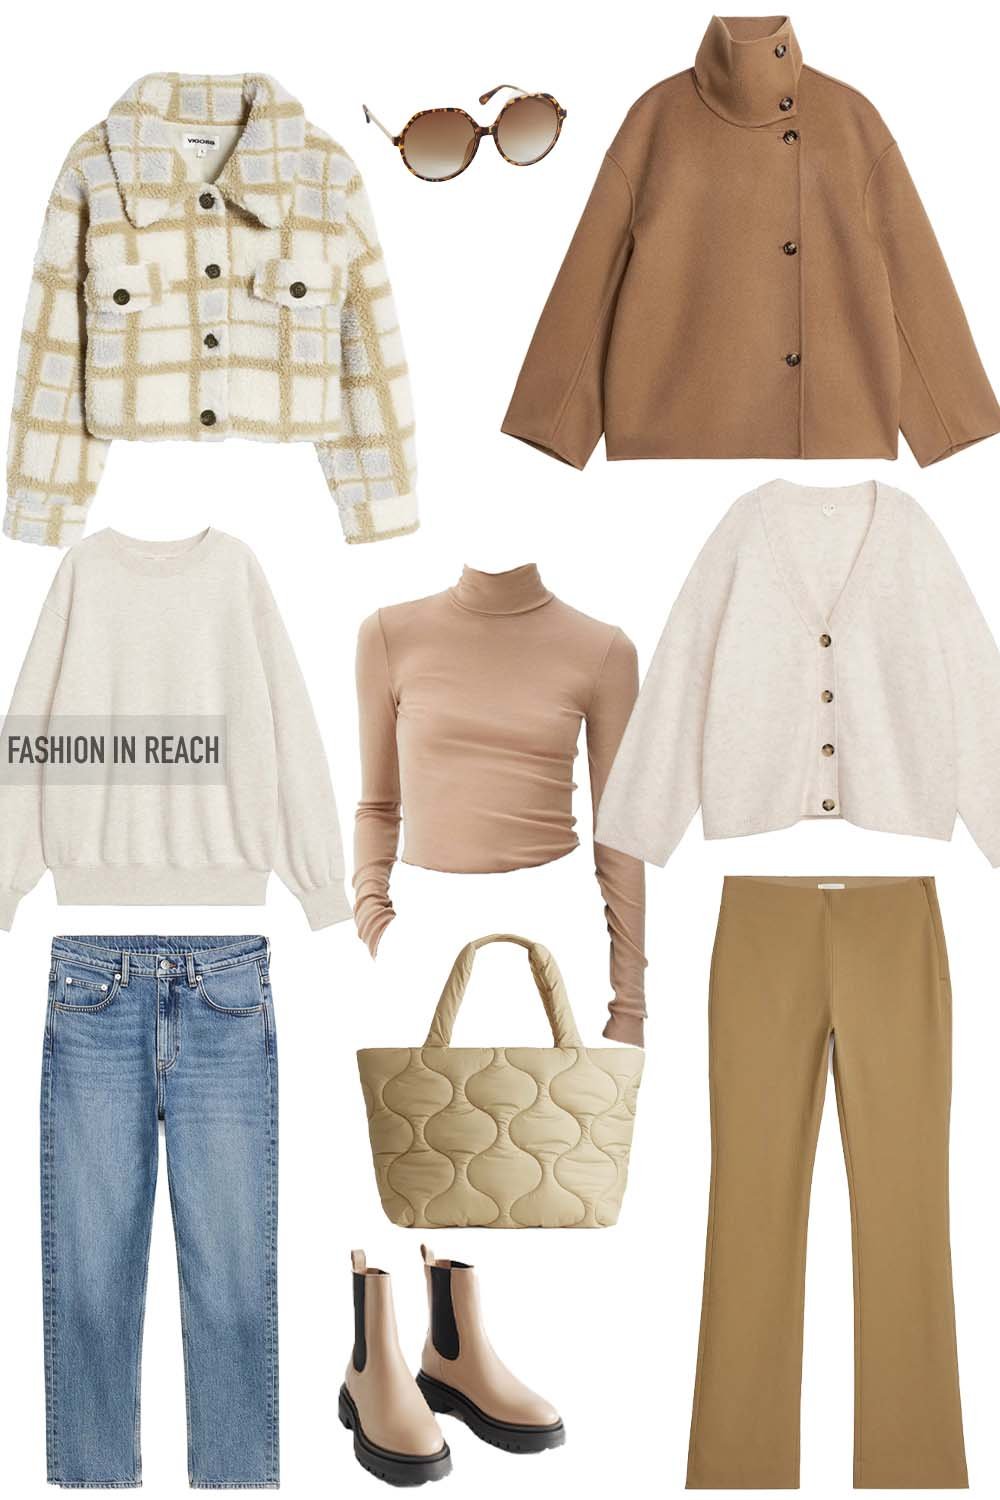 Spring Outfit Ideas for Women in Light Colors — FASHION IN REACH